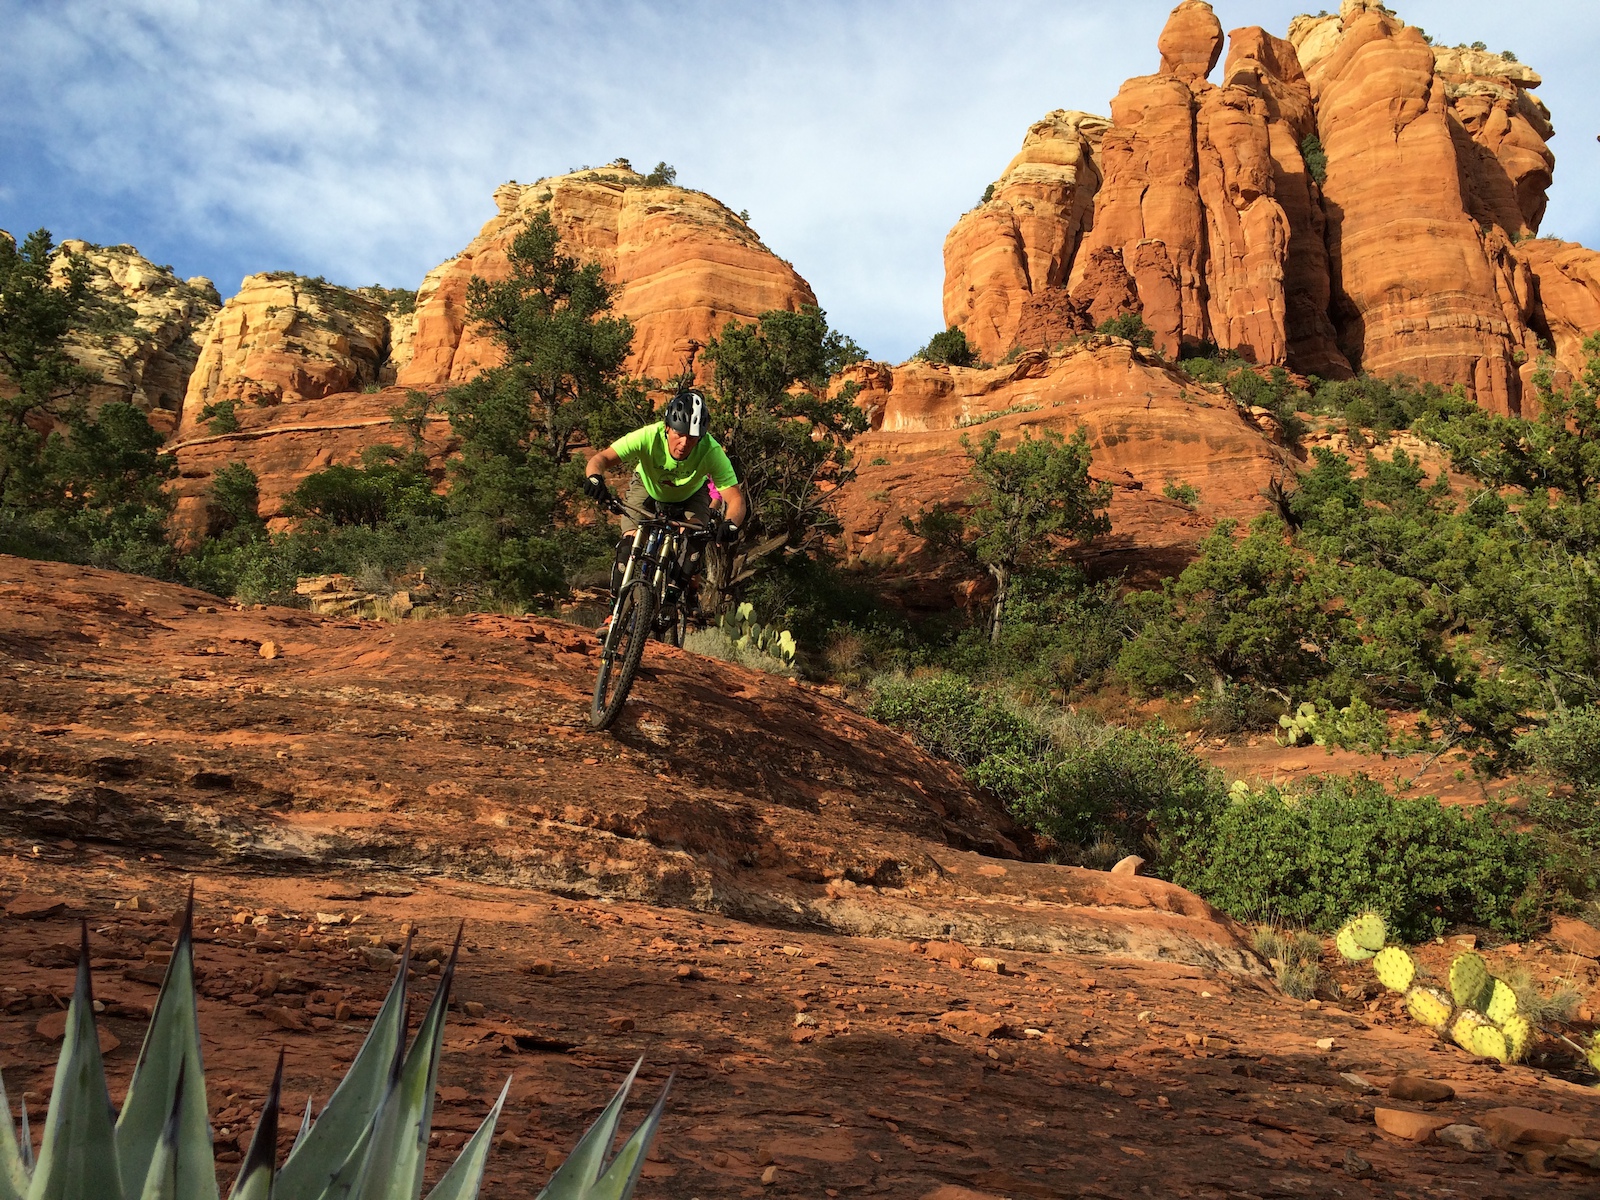 Mountain Bike Guide Denis Rogers knows the way to greater fun. You can thank this guy for inspiring the Sedona Benduro!